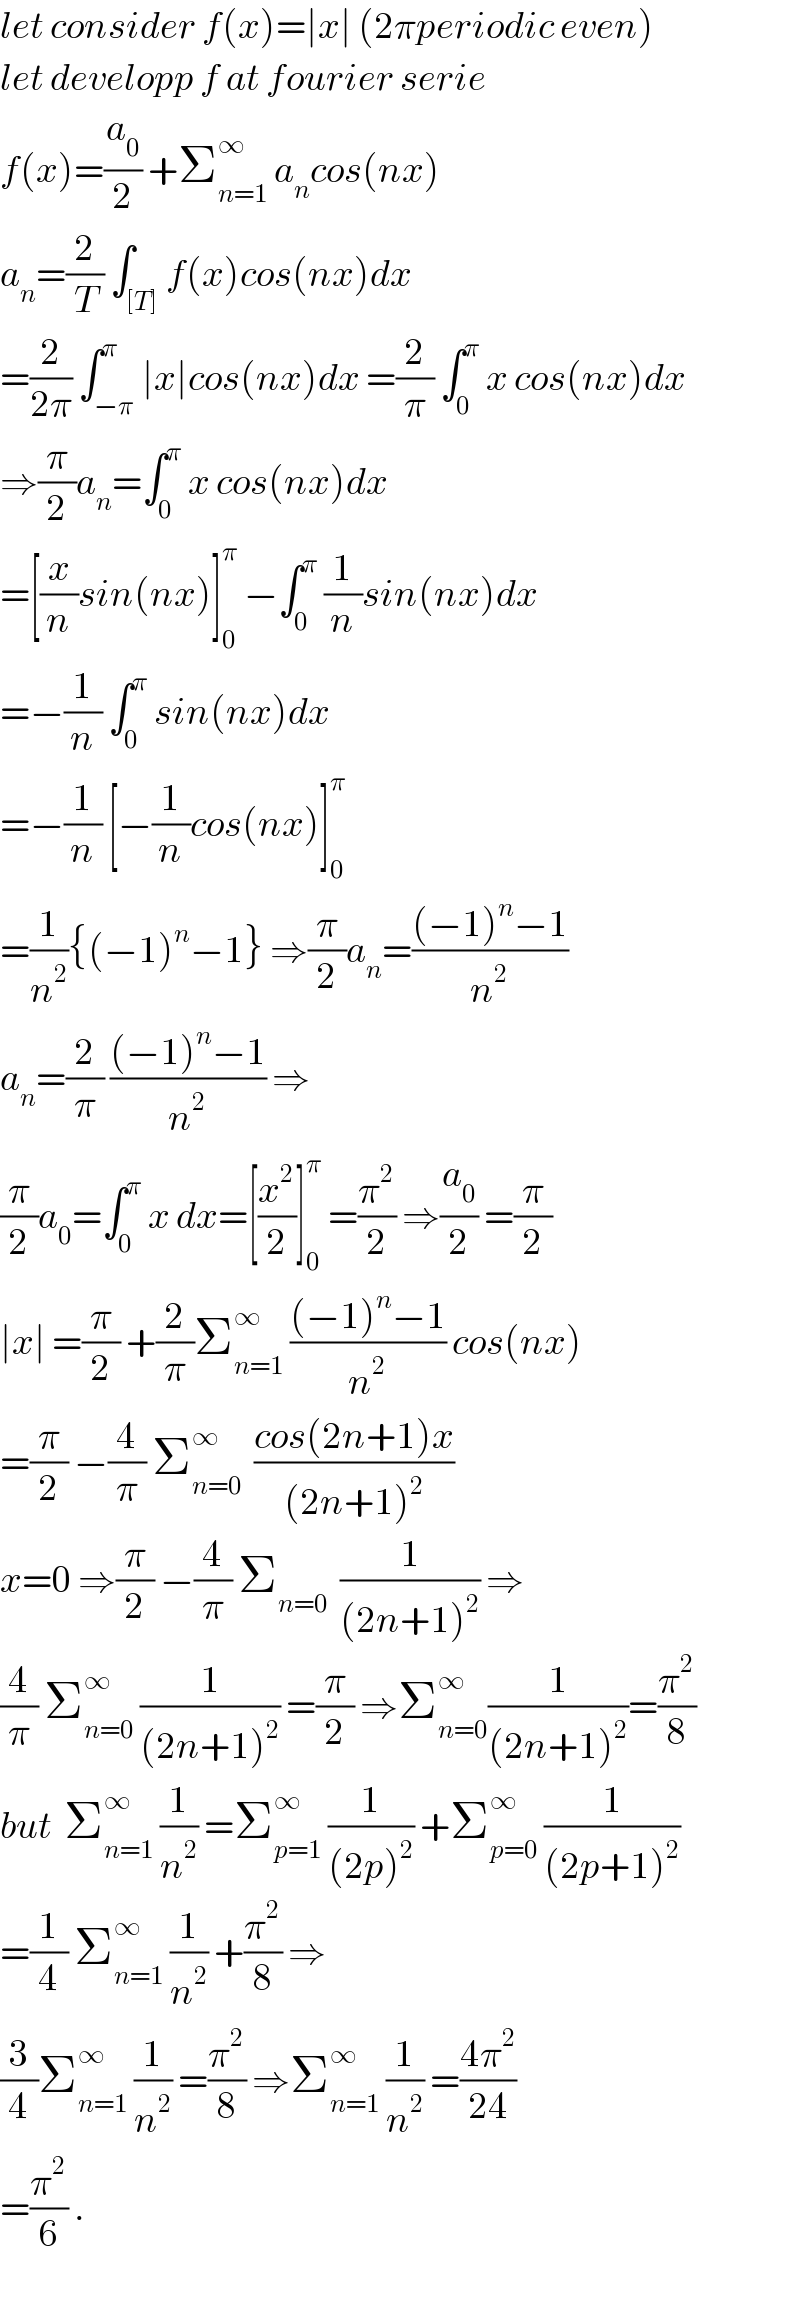 let consider f(x)=∣x∣ (2πperiodic even)  let developp f at fourier serie  f(x)=(a_0 /2) +Σ_(n=1) ^∞  a_n cos(nx)  a_n =(2/T) ∫_([T]) f(x)cos(nx)dx  =(2/(2π)) ∫_(−π) ^π ∣x∣cos(nx)dx =(2/π) ∫_0 ^π  x cos(nx)dx  ⇒(π/2)a_n =∫_0 ^π  x cos(nx)dx  =[(x/n)sin(nx)]_0 ^π  −∫_0 ^π  (1/n)sin(nx)dx  =−(1/n) ∫_0 ^π  sin(nx)dx  =−(1/n) [−(1/n)cos(nx)]_0 ^π   =(1/n^2 ){(−1)^n −1} ⇒(π/2)a_n =(((−1)^n −1)/n^2 )  a_n =(2/π) (((−1)^n −1)/n^2 ) ⇒  (π/2)a_0 =∫_0 ^π  x dx=[(x^2 /2)]_0 ^π  =(π^2 /2) ⇒(a_0 /2) =(π/2)  ∣x∣ =(π/2) +(2/π)Σ_(n=1) ^∞  (((−1)^n −1)/n^2 ) cos(nx)  =(π/2) −(4/π) Σ_(n=0) ^∞   ((cos(2n+1)x)/((2n+1)^2 ))  x=0 ⇒(π/2) −(4/π) Σ_(n=0)   (1/((2n+1)^2 )) ⇒  (4/π) Σ_(n=0) ^∞  (1/((2n+1)^2 )) =(π/2) ⇒Σ_(n=0) ^∞ (1/((2n+1)^2 ))=(π^2 /8)  but  Σ_(n=1) ^∞  (1/n^2 ) =Σ_(p=1) ^∞  (1/((2p)^2 )) +Σ_(p=0) ^∞  (1/((2p+1)^2 ))  =(1/4) Σ_(n=1) ^∞  (1/n^2 ) +(π^2 /8) ⇒  (3/4)Σ_(n=1) ^∞  (1/n^2 ) =(π^2 /8) ⇒Σ_(n=1) ^∞  (1/n^2 ) =((4π^2 )/(24))  =(π^2 /6) .  